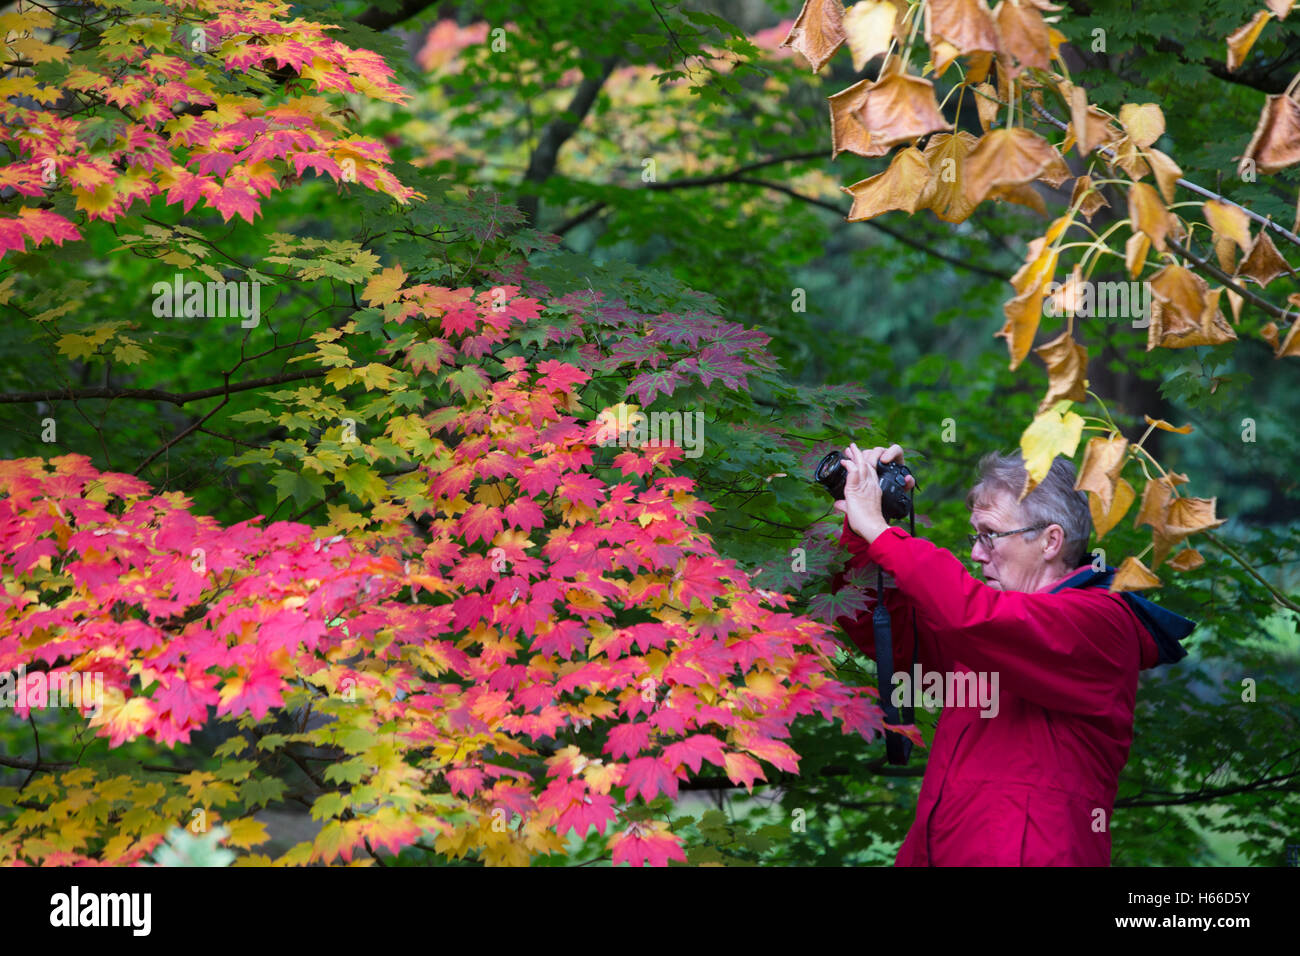 The national Arboretum, Westonbirt, visitors stroll through the trees in their rich autumn colours, taking pictures and enjoying the annual spectacle. Stock Photo